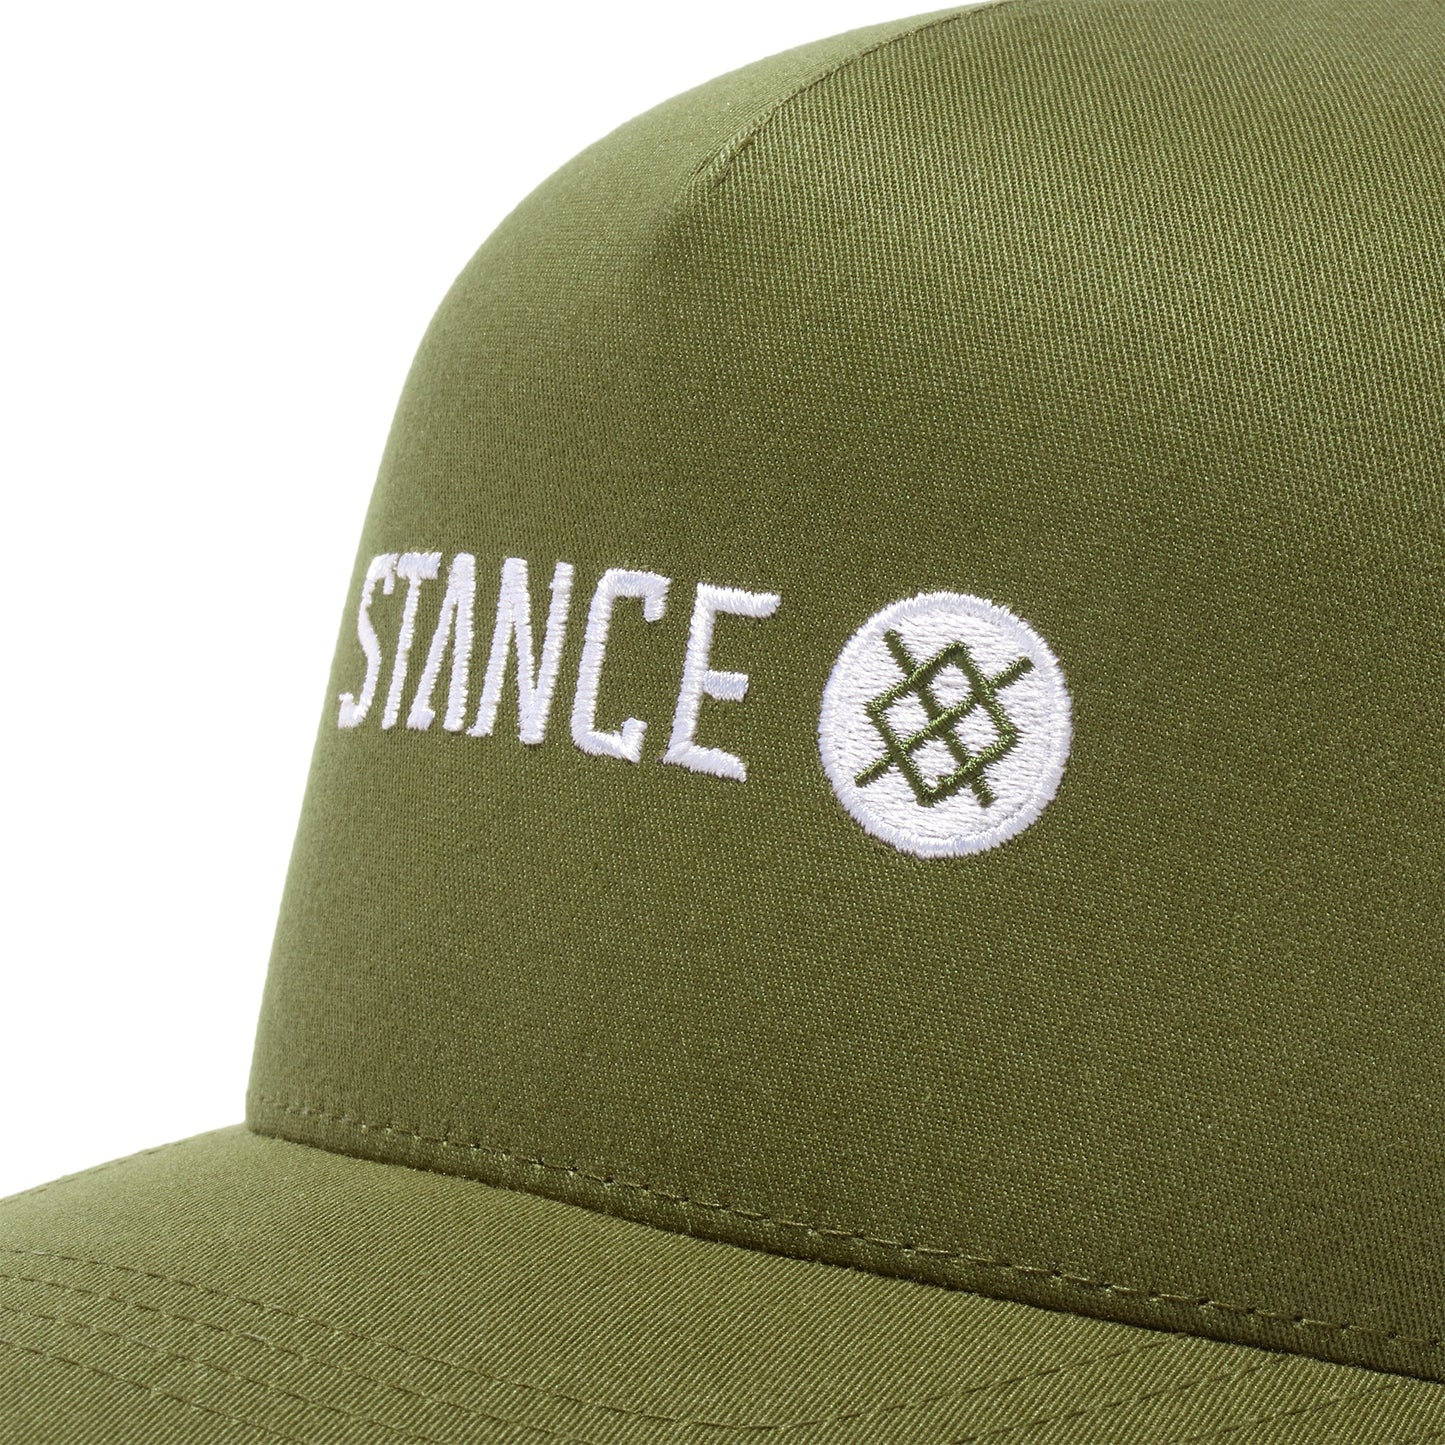 Stance Icon Snapback Hat Military Green